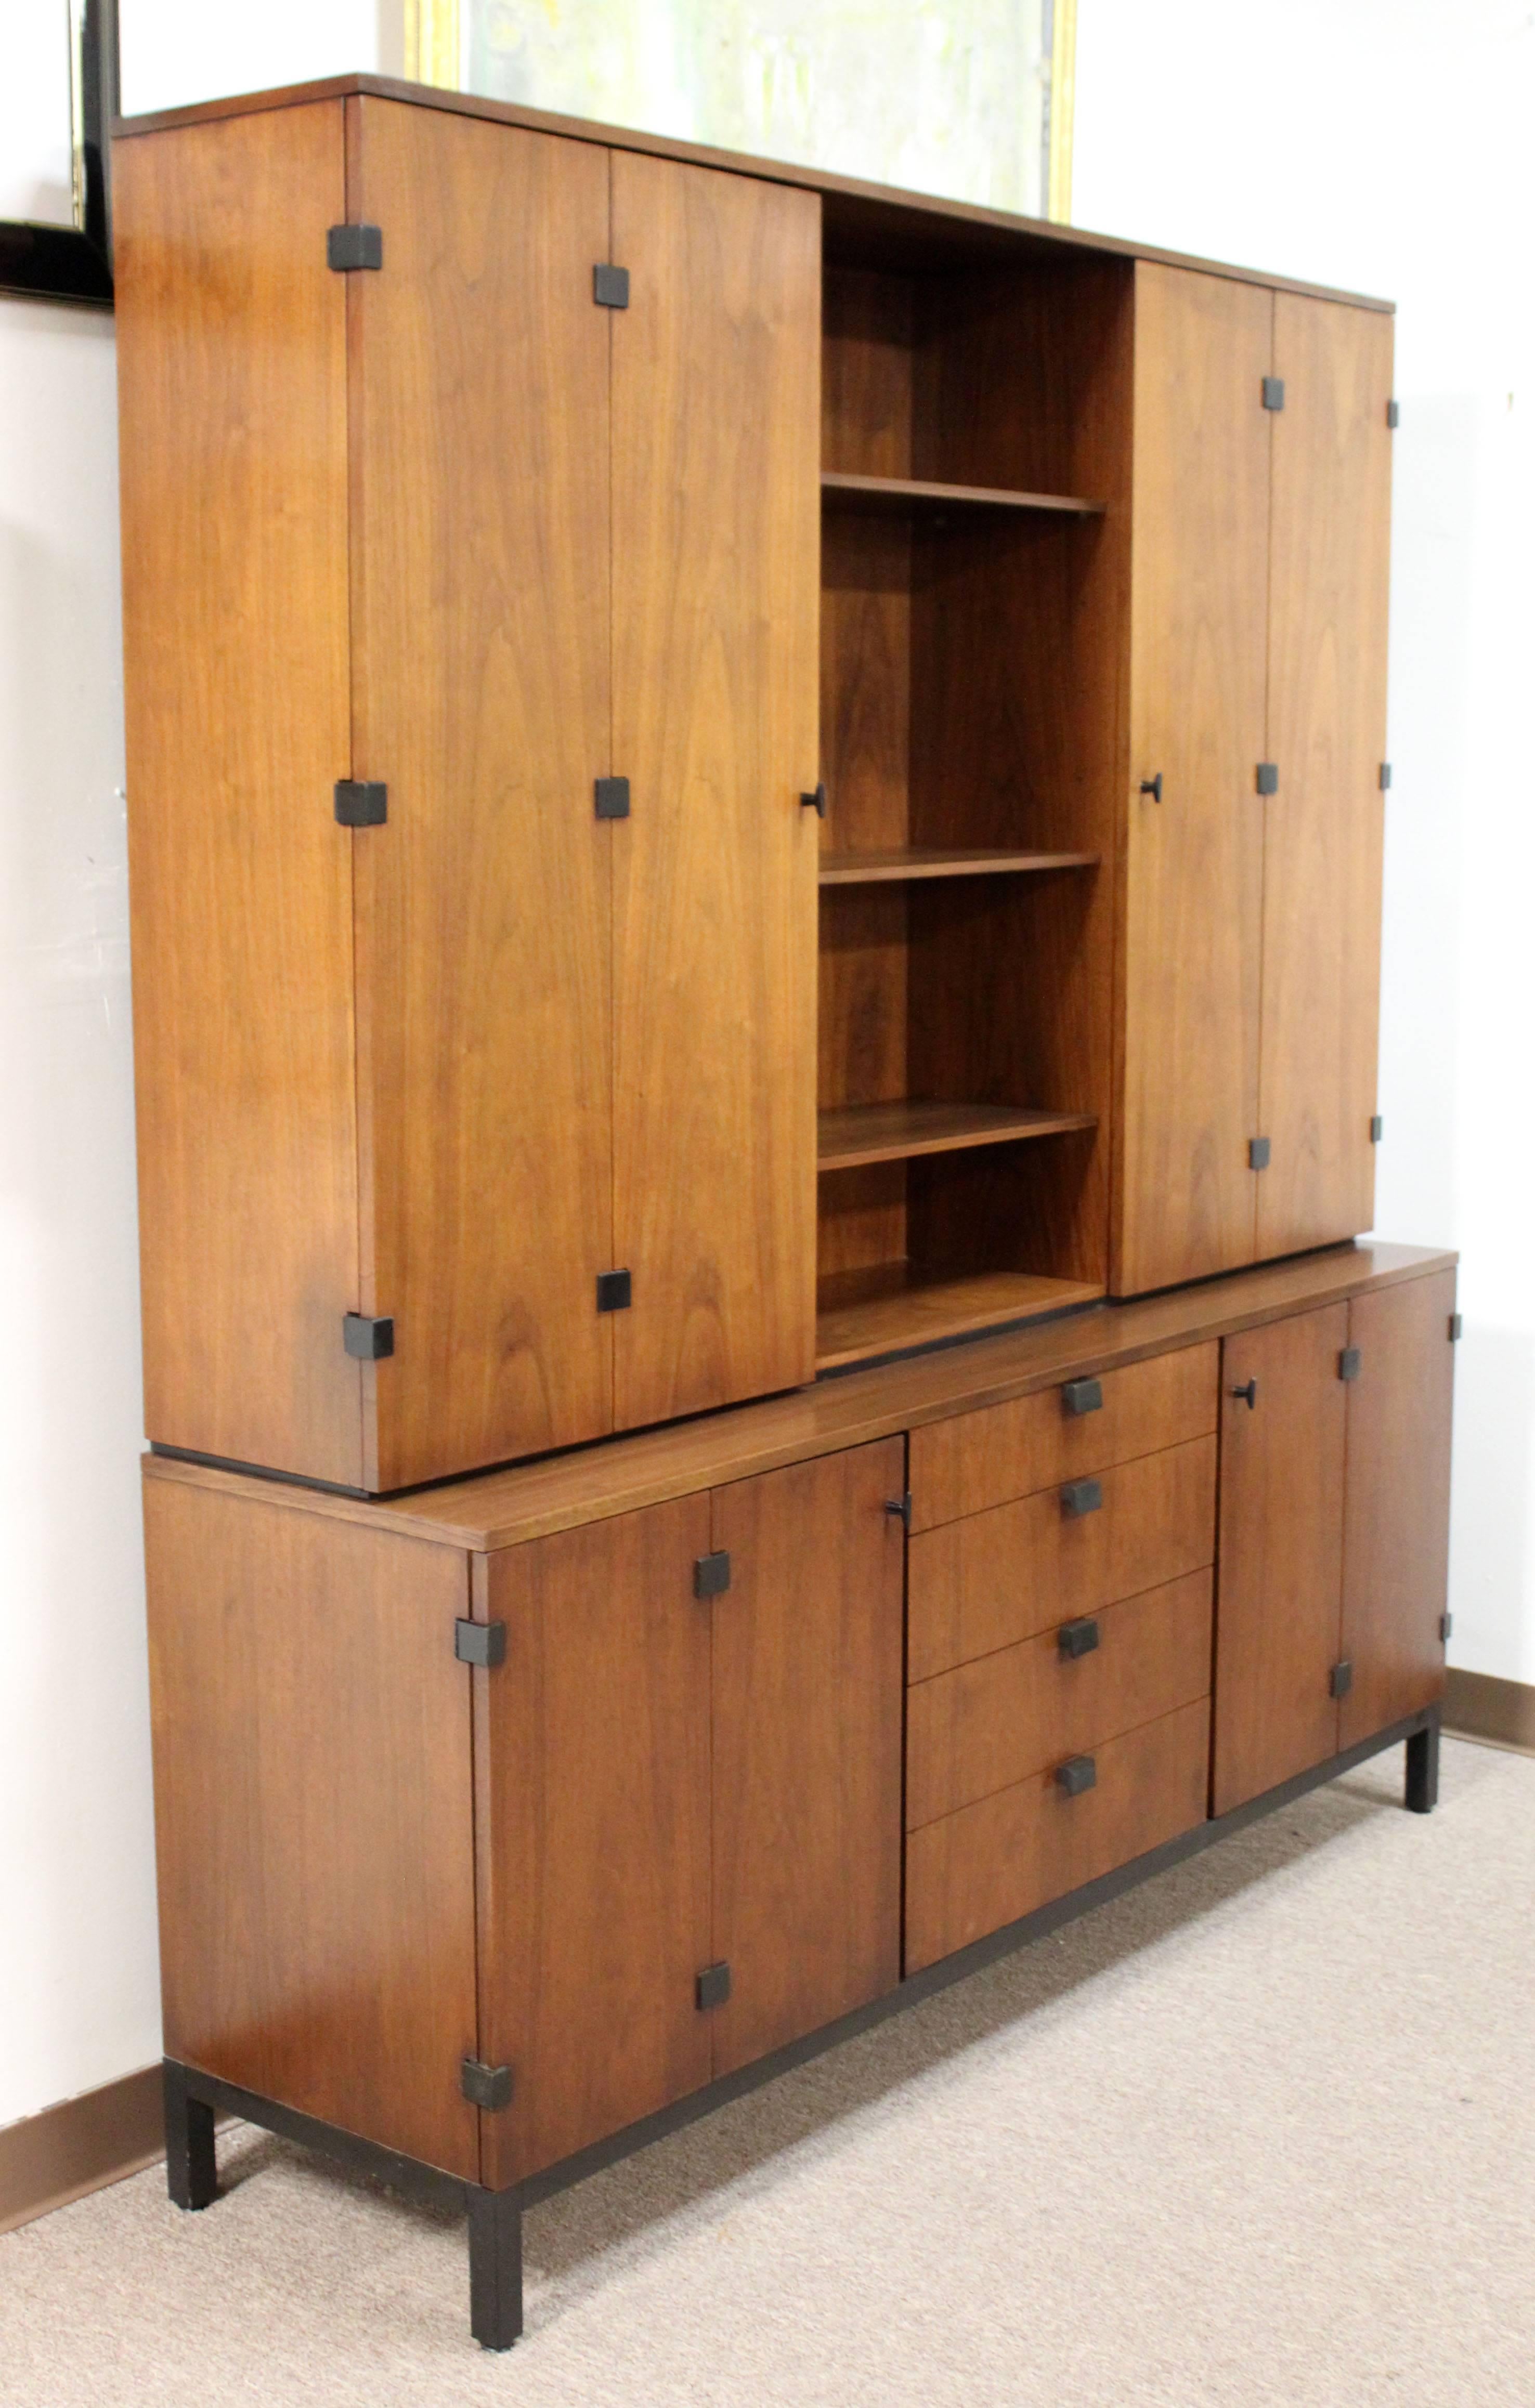 For your consideration is an incredible, walnut credenza and removable hutch, by Merton Gershun for Dillingham, circa the 1960s. In excellent condition, with some minor surface scratches. The dimensions are 72